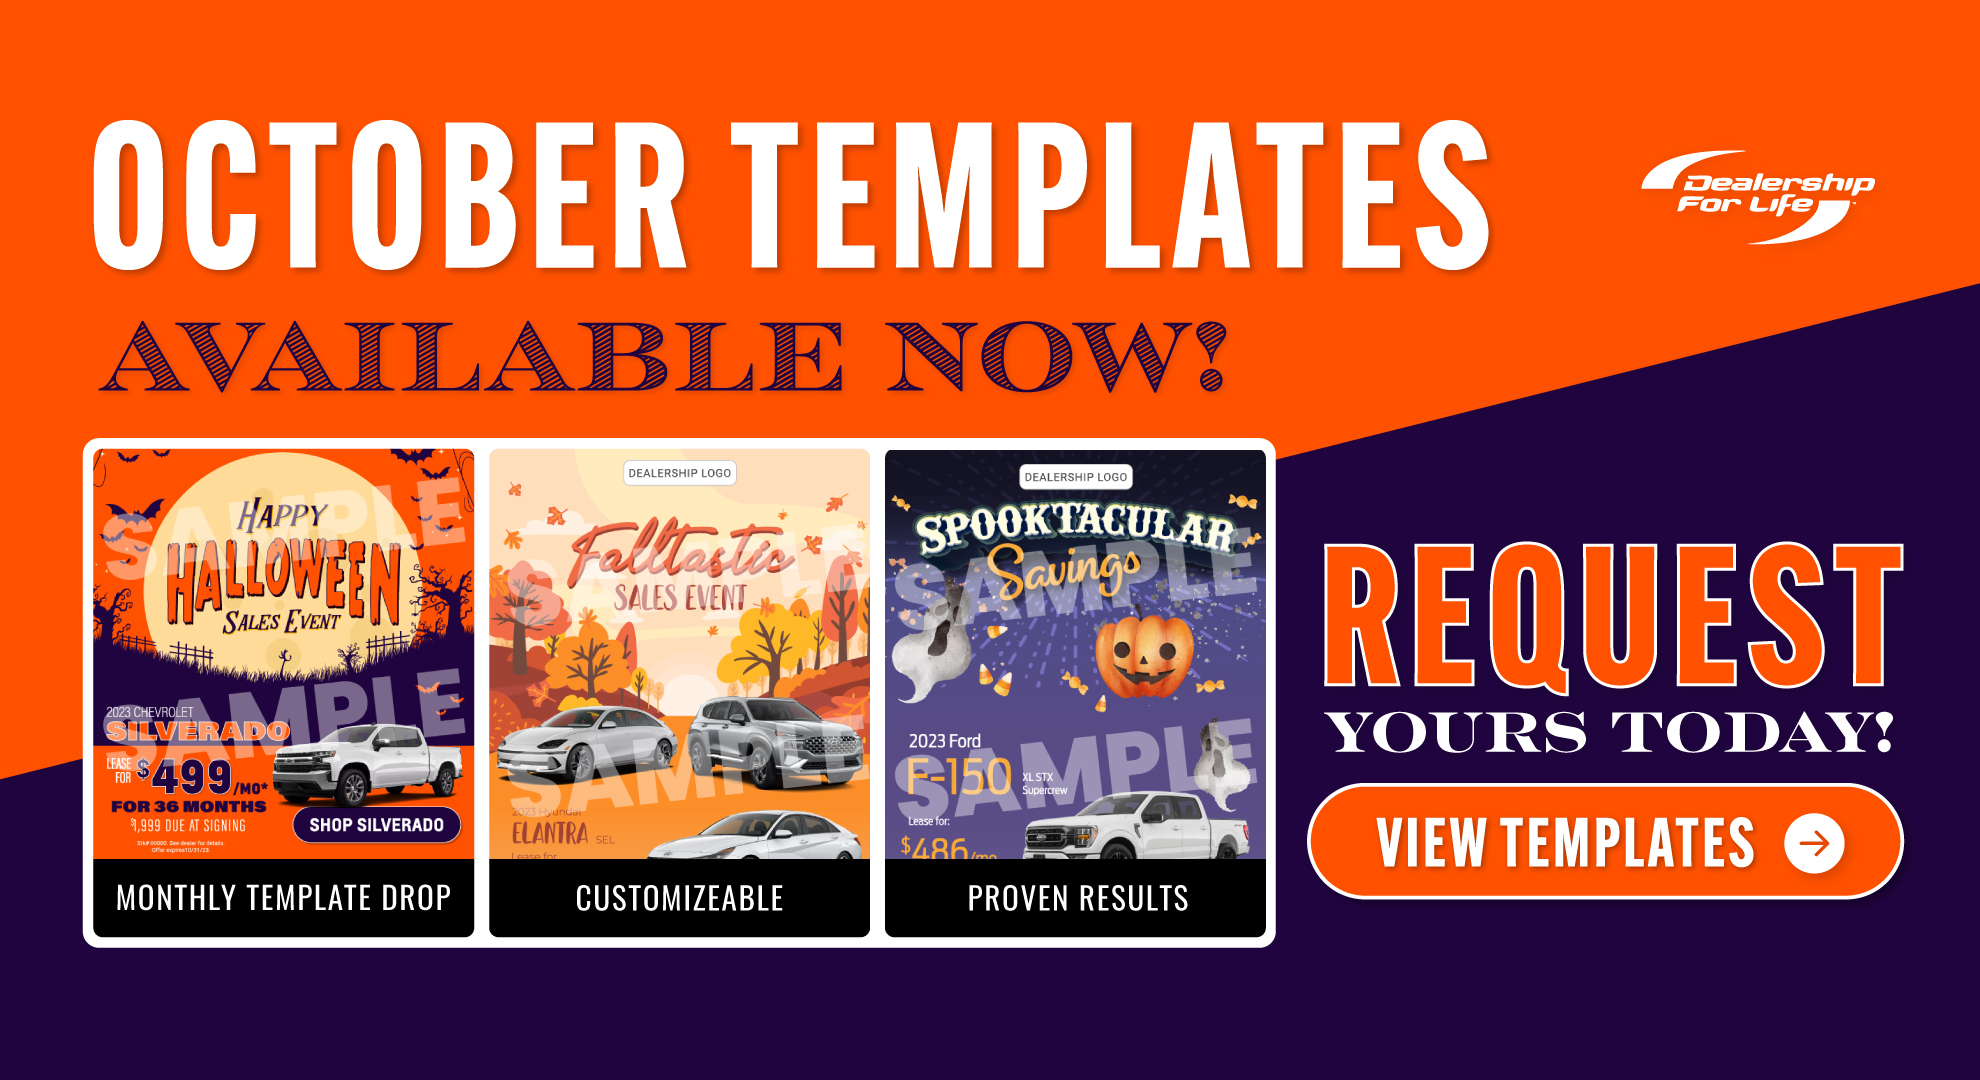 October Email Templates